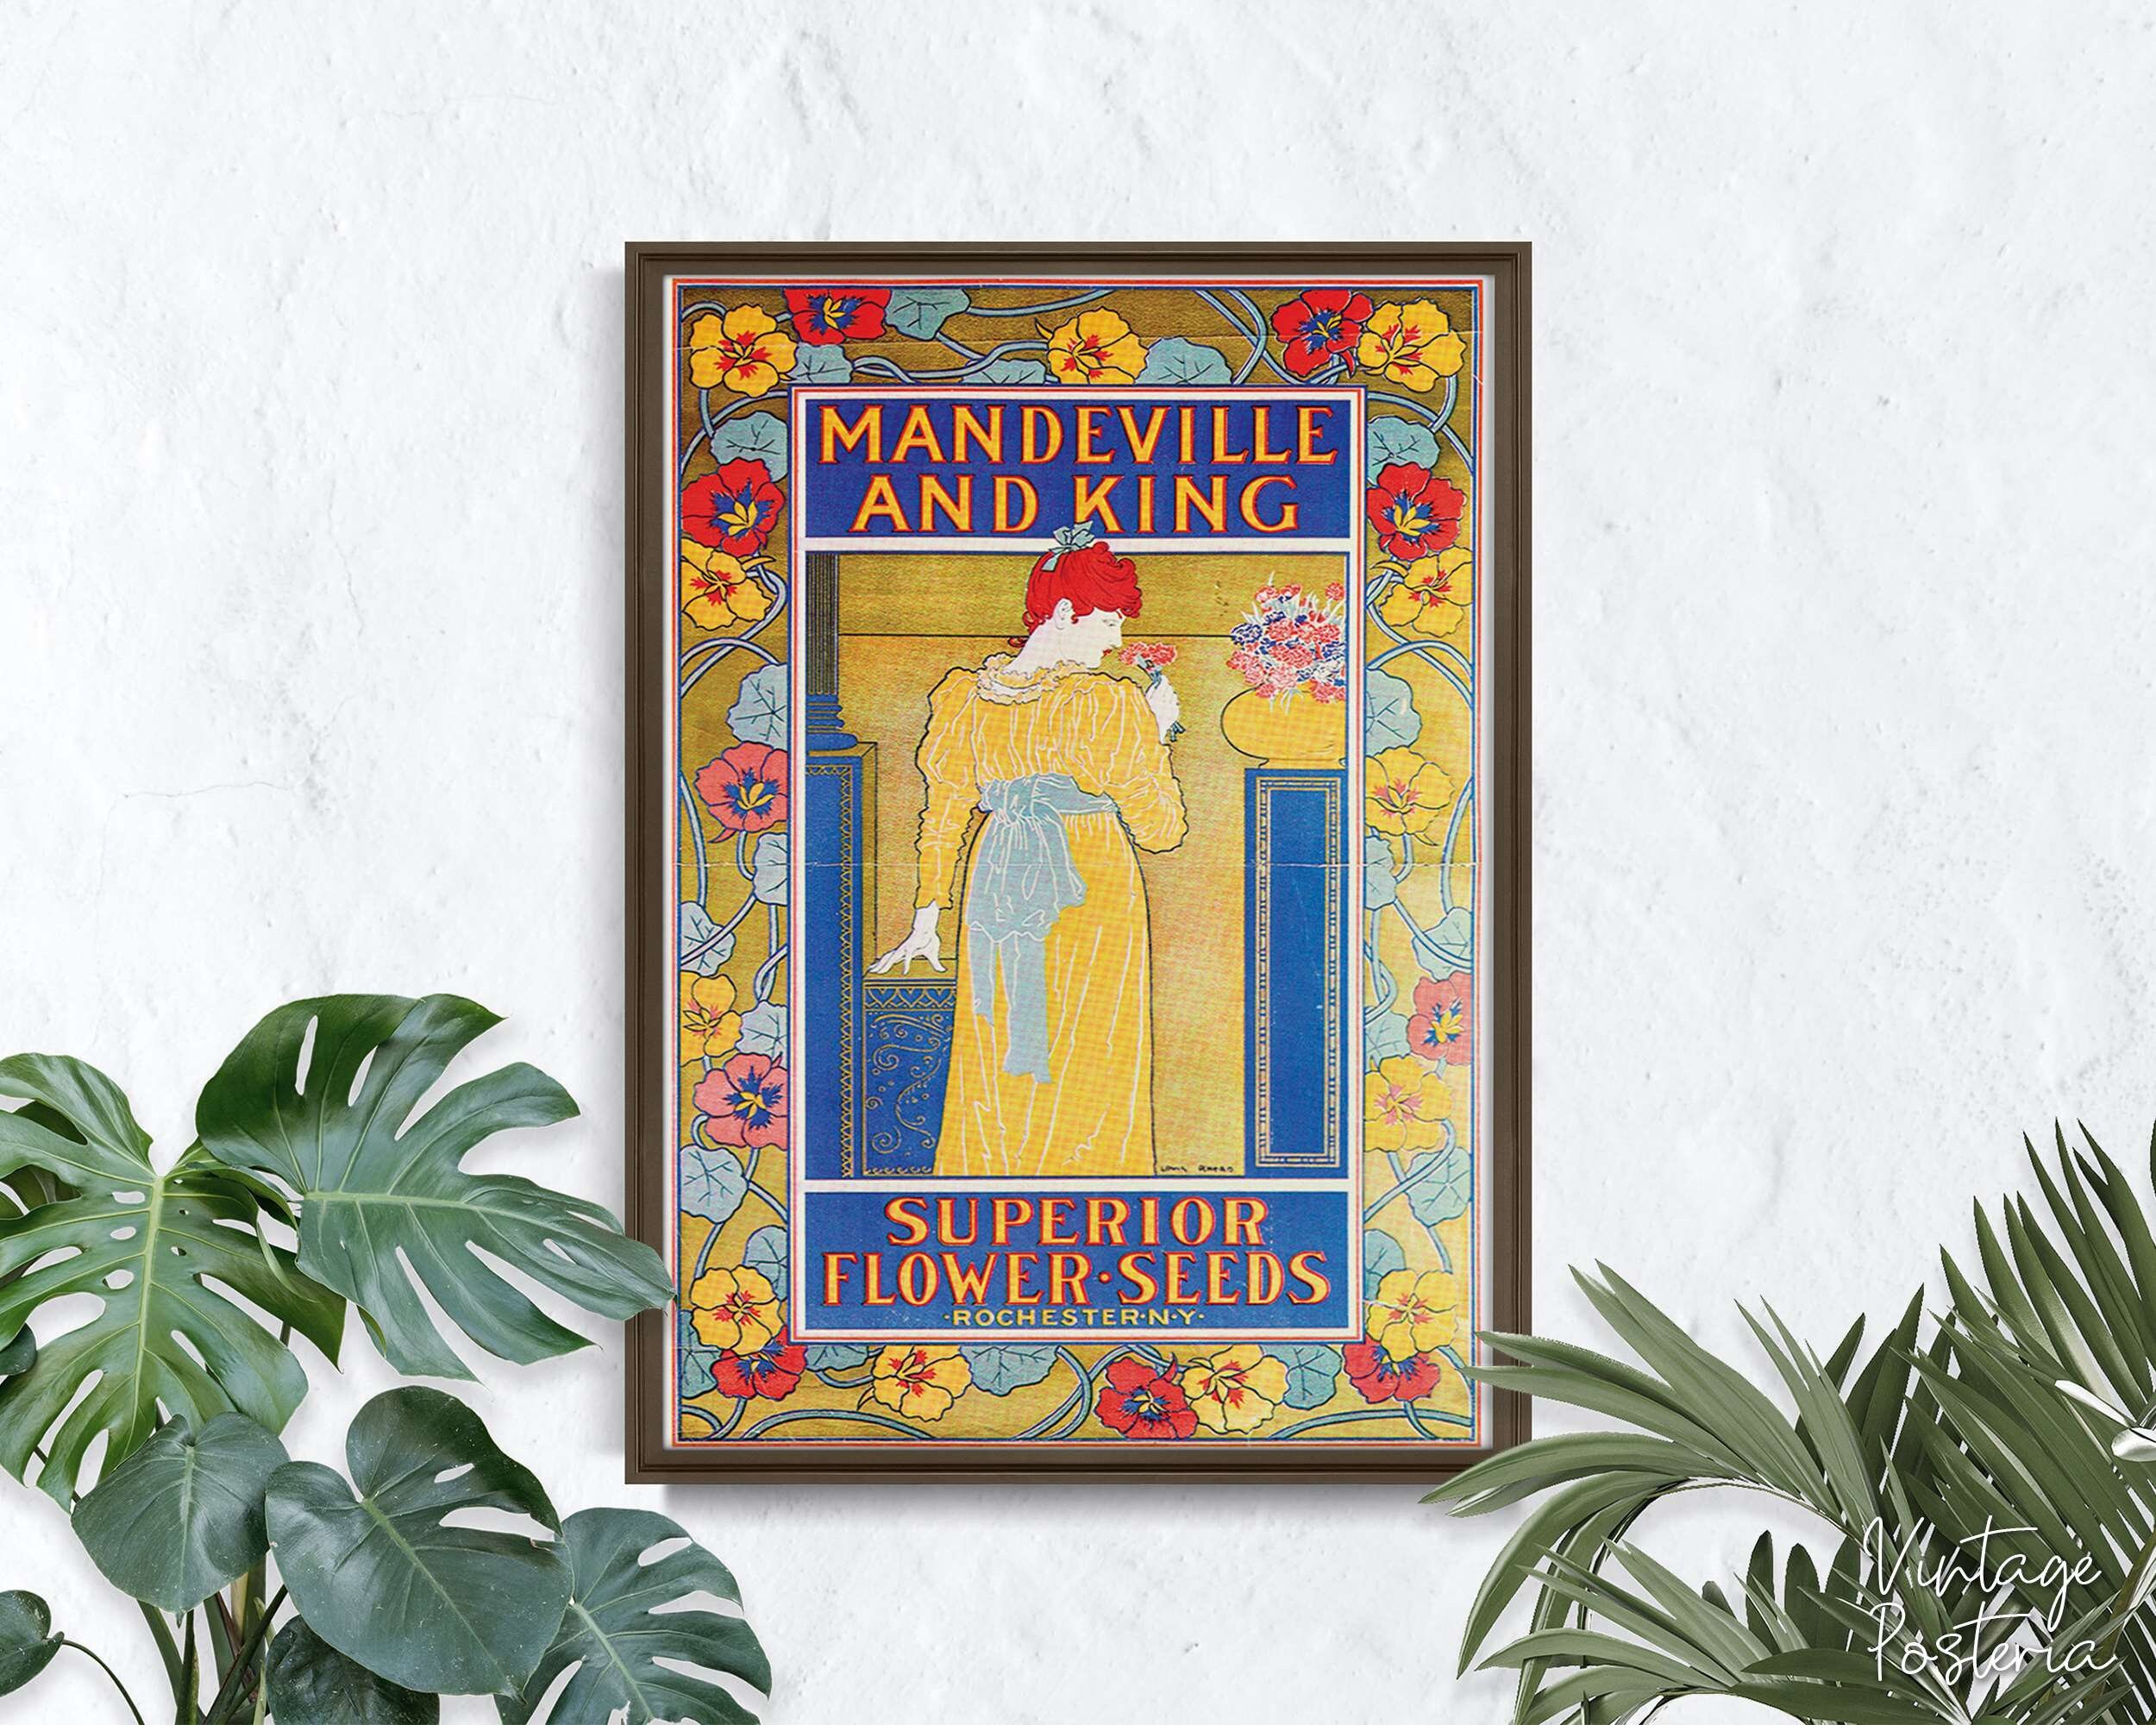 Mandeville and King Superior Flower Seeds Retro Poster Woman